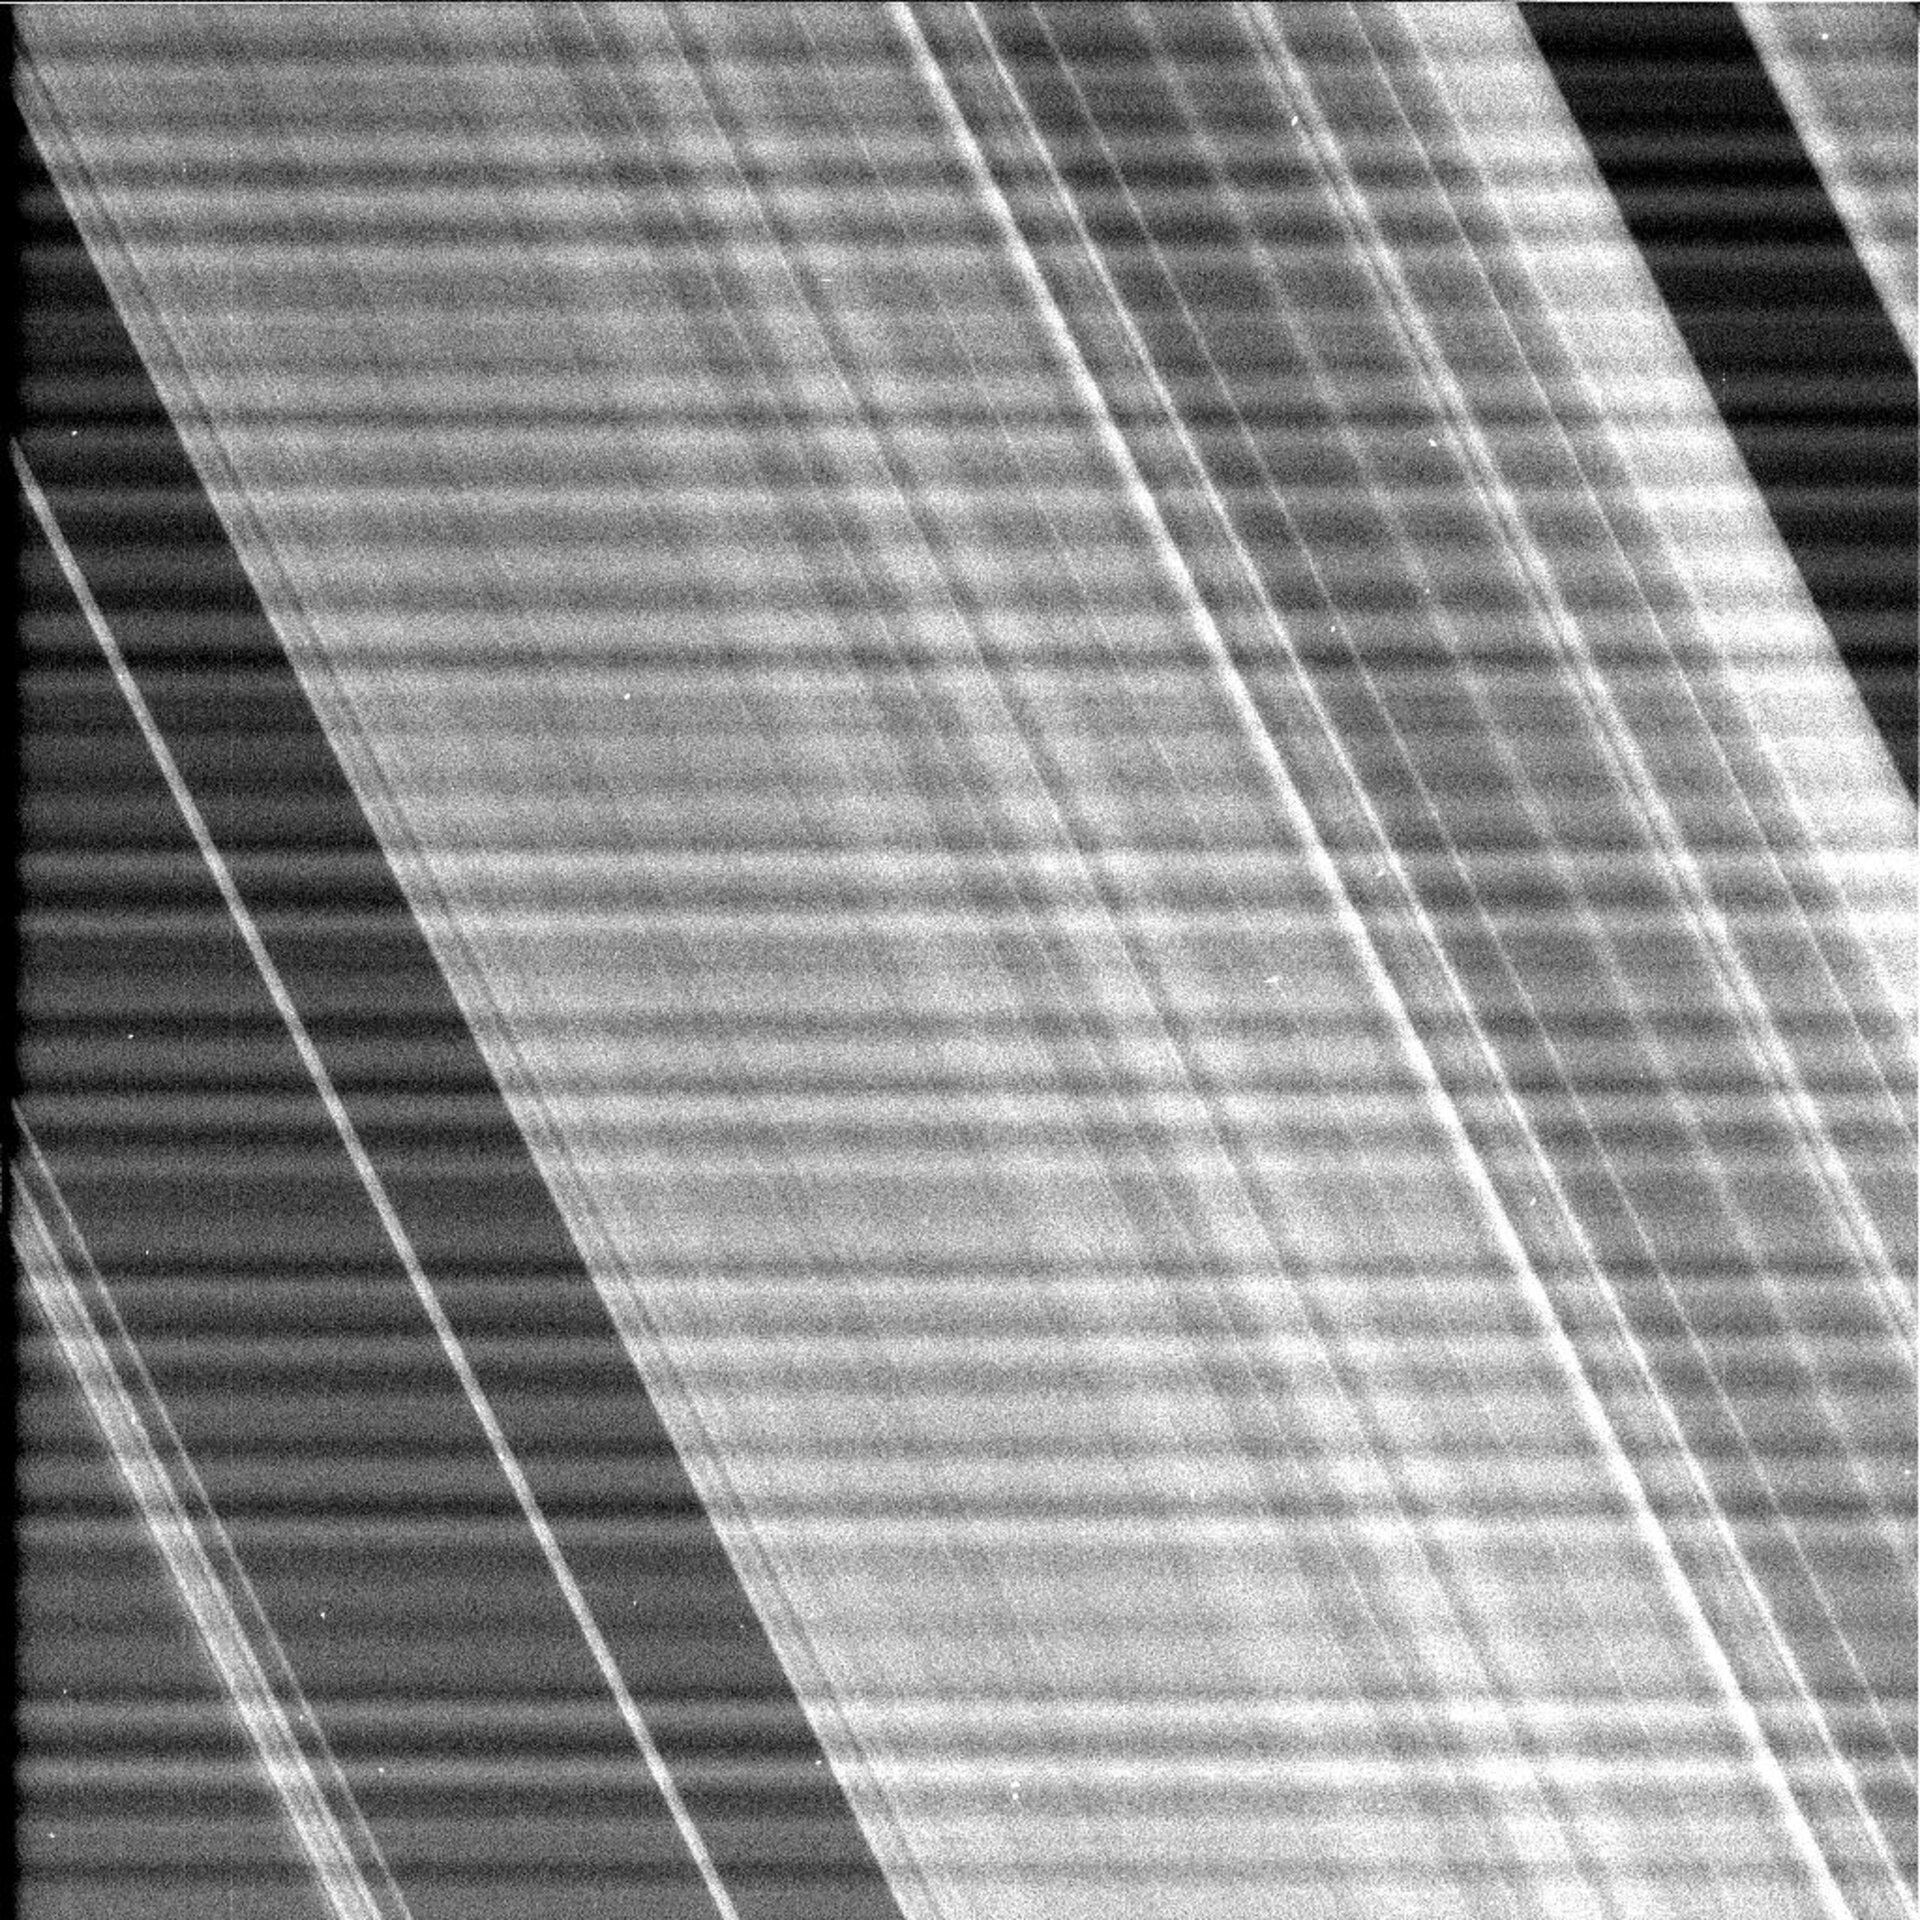 One of the first raw images from Cassini-Huygens